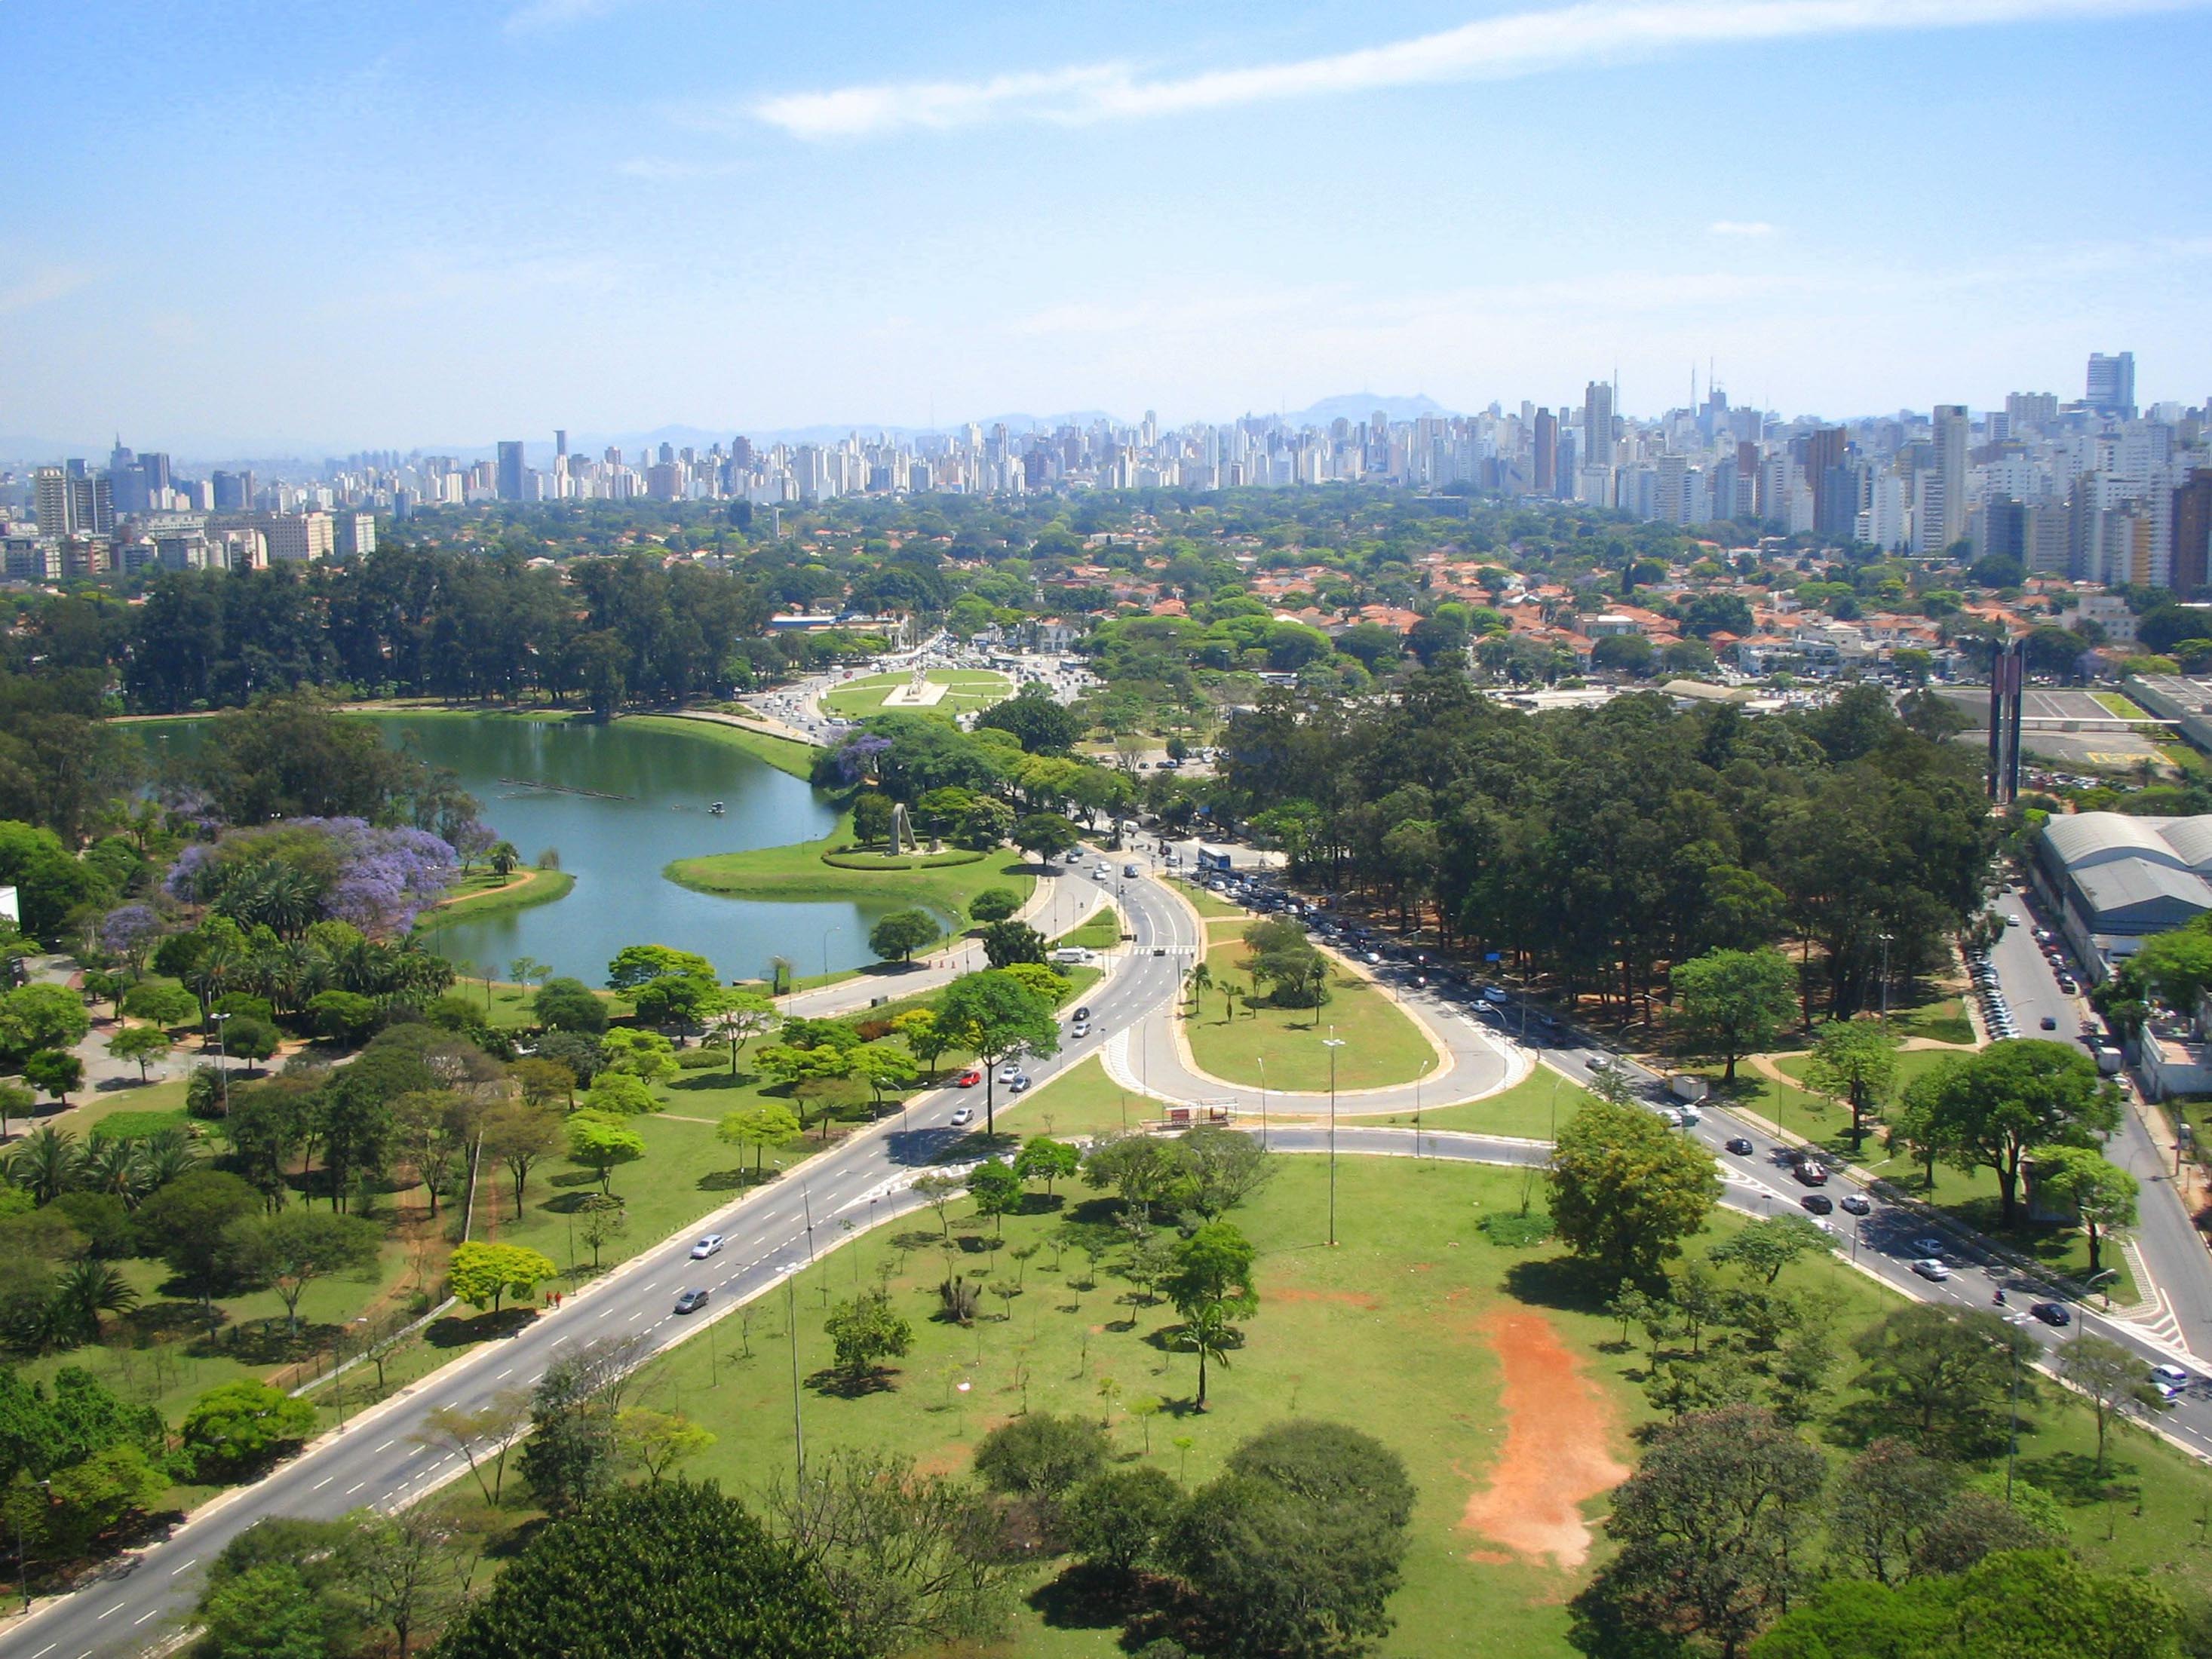 Travel Guide to Visit Sao Paulo: Food, Culture, Covid Etiquette - Bloomberg